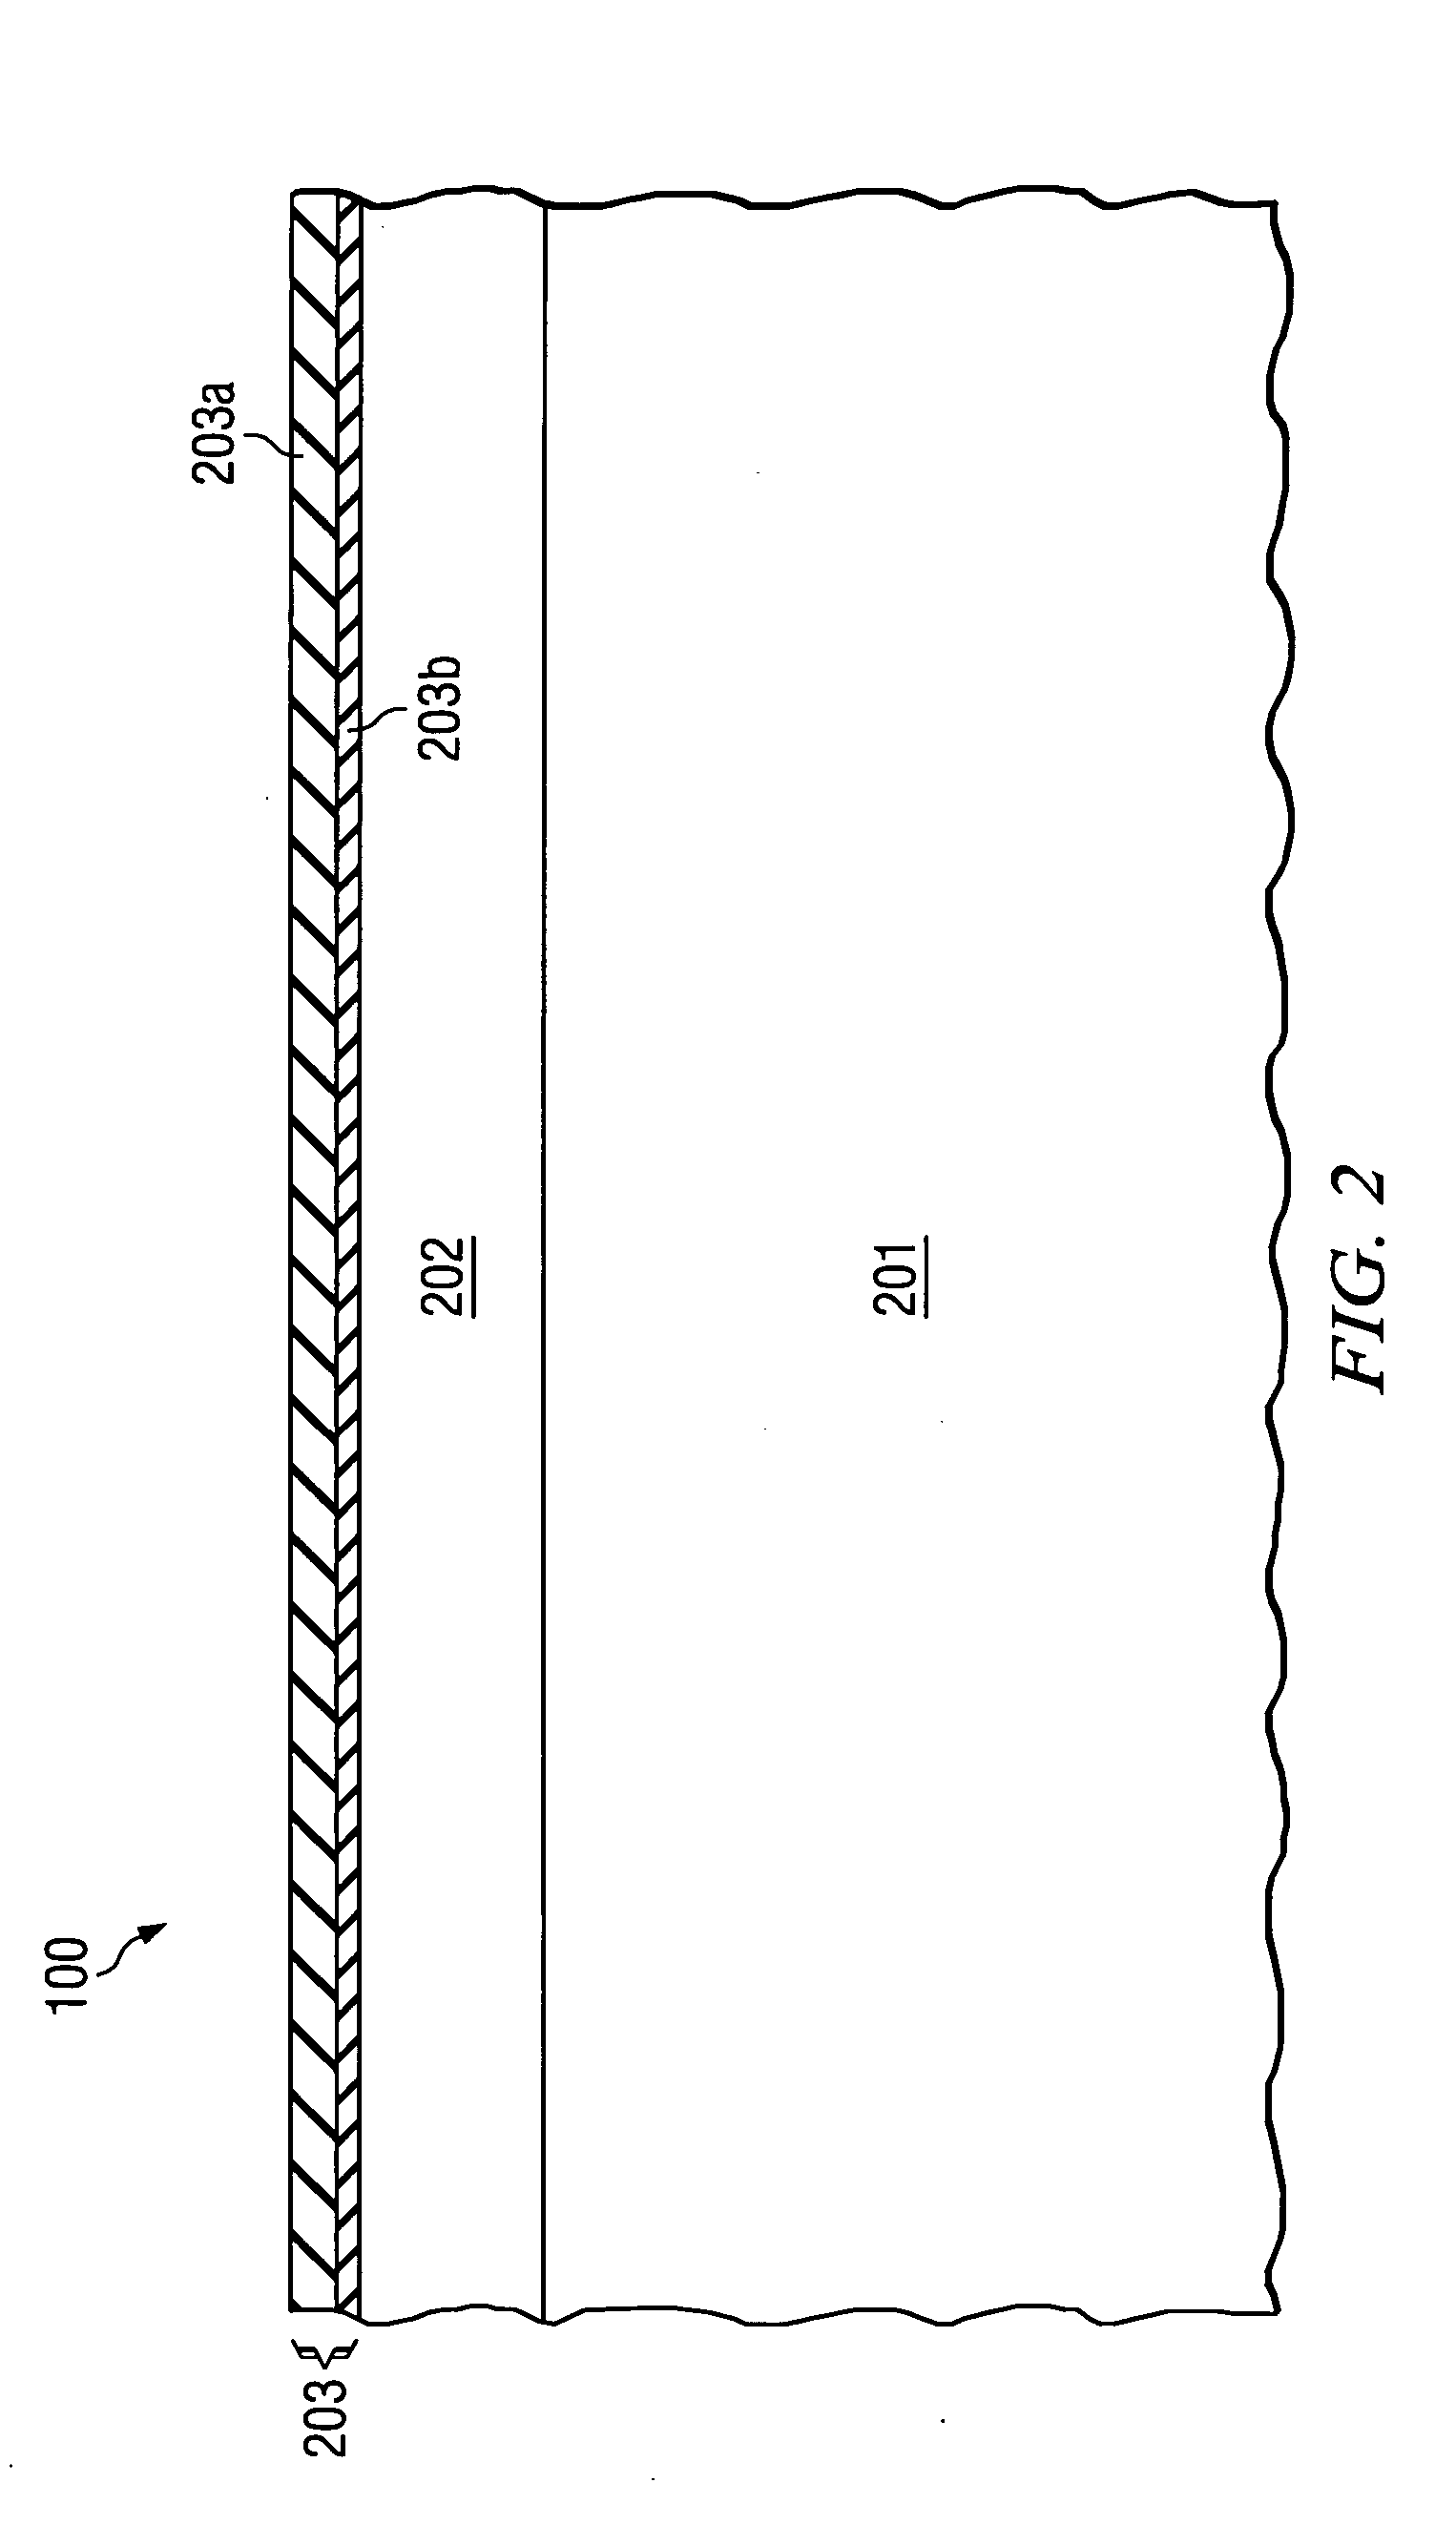 Bipolar transistor having base over buried insulating and polycrystalline regions, and method of fabrication